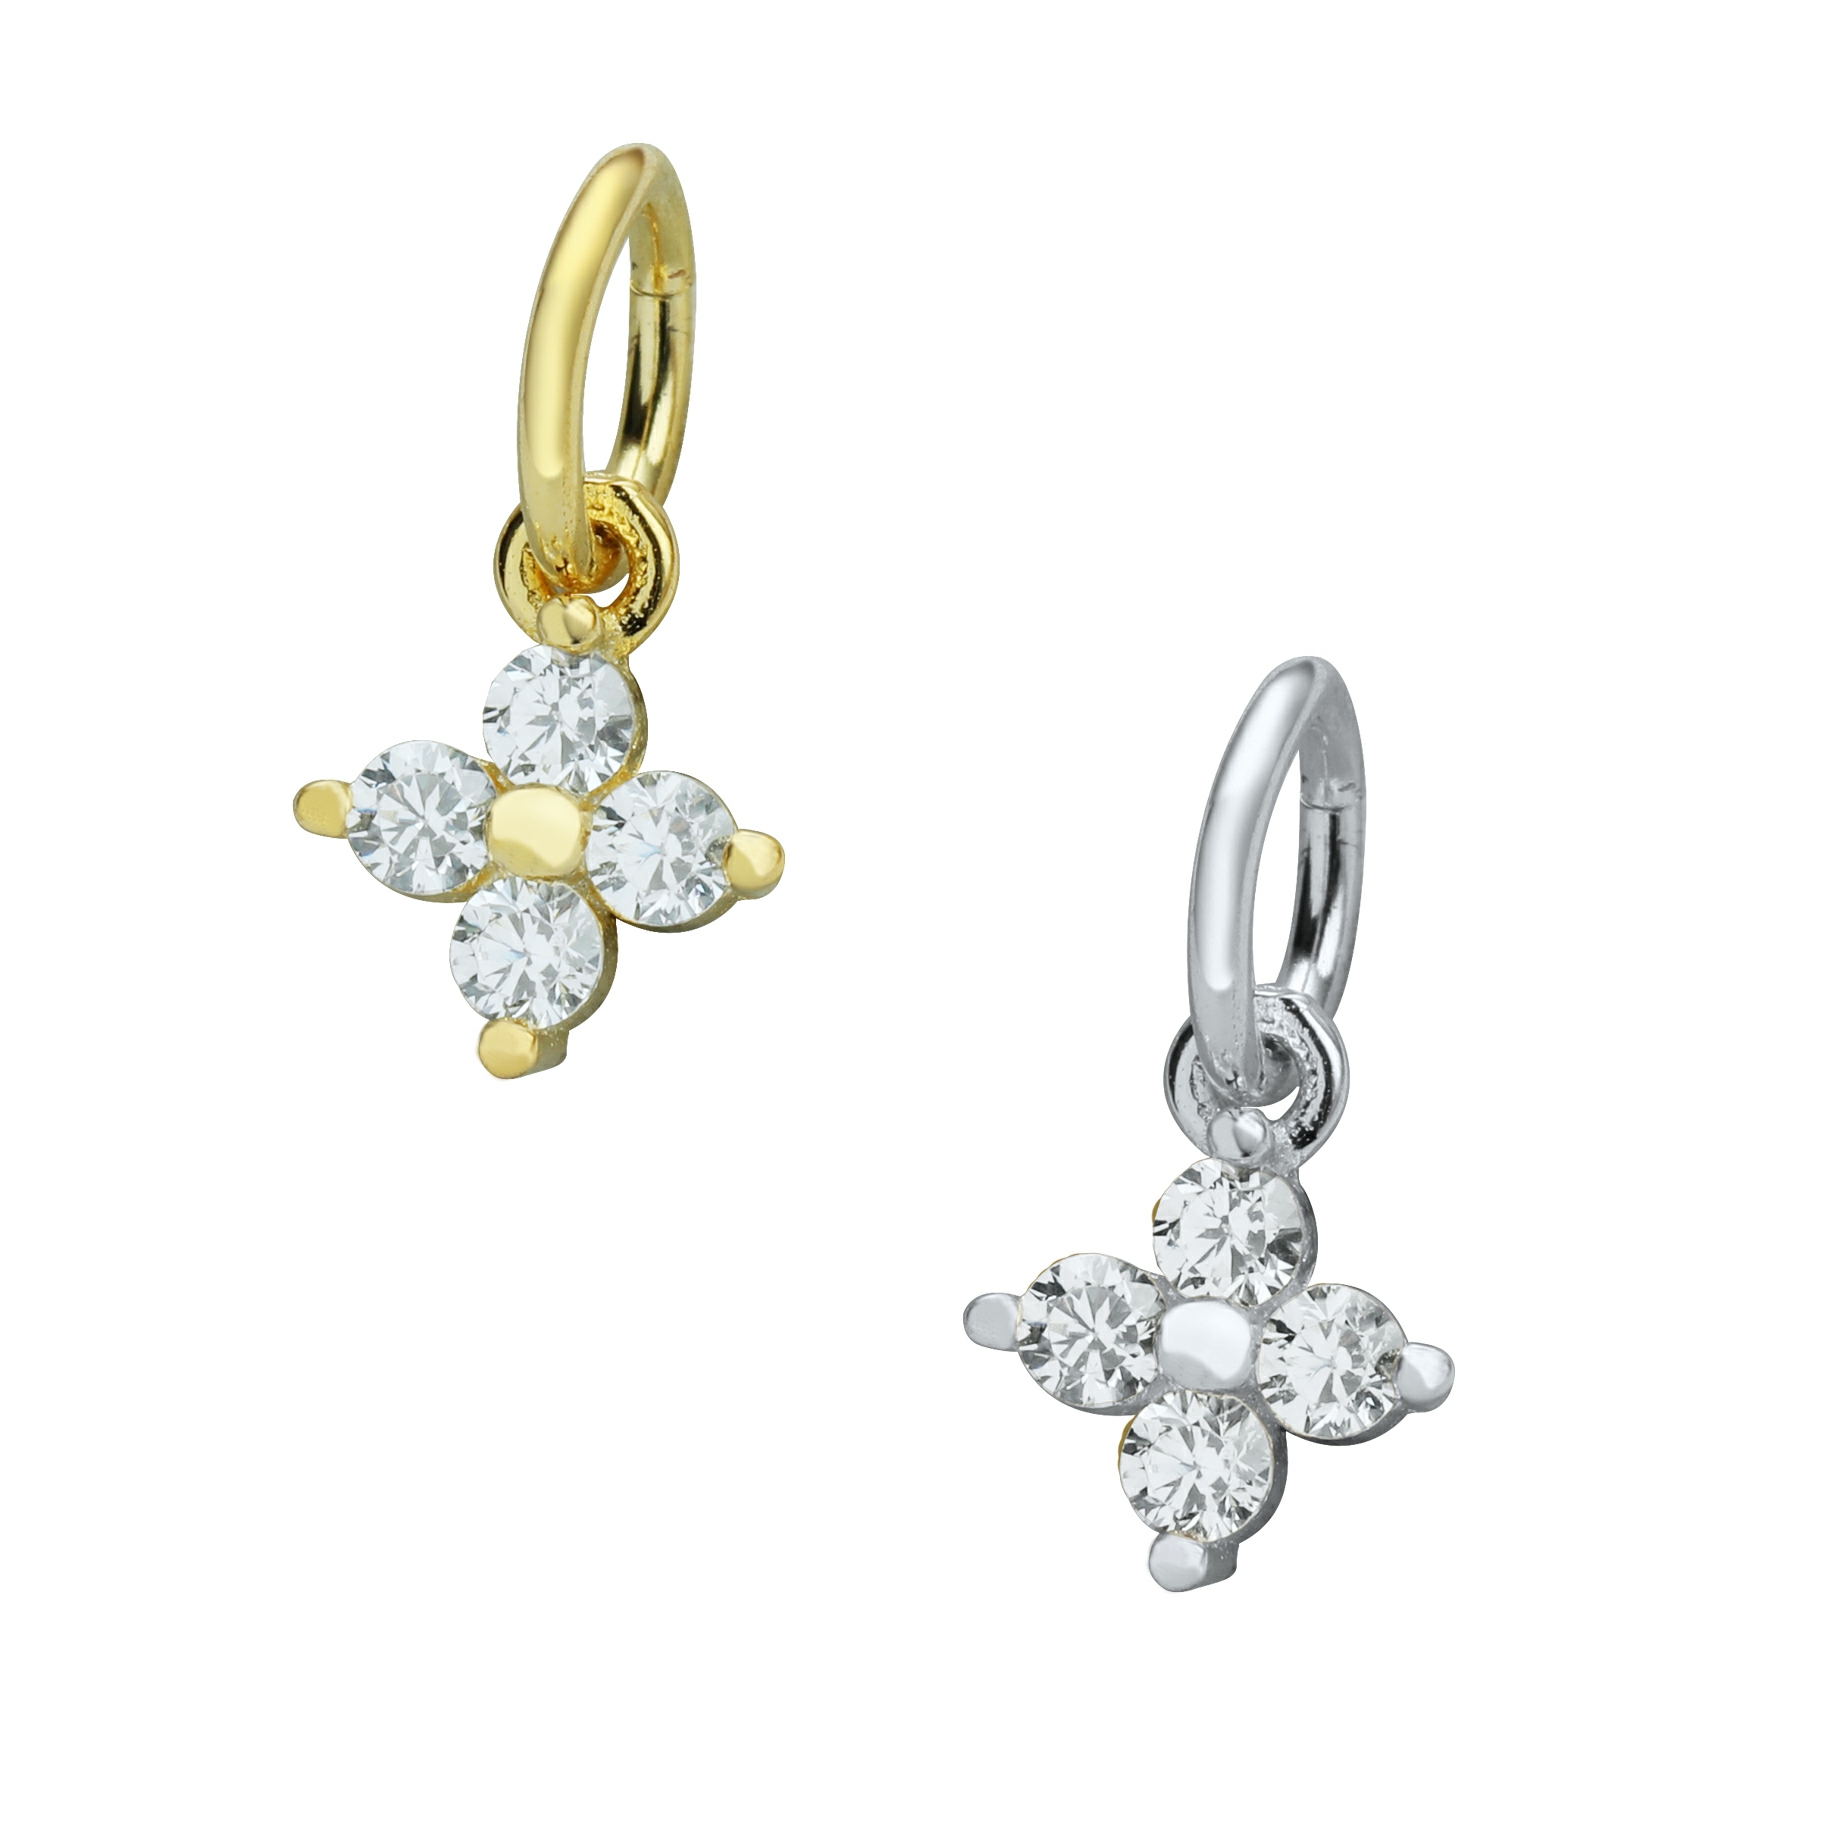 5MM CZ Stone Flower Charm,Solid 925 Sterling Silver Gold Plated Pendant Charm,4 Stones CZ Stone Charm,DIY Pendant Charm Supplies 1431195 - Click Image to Close